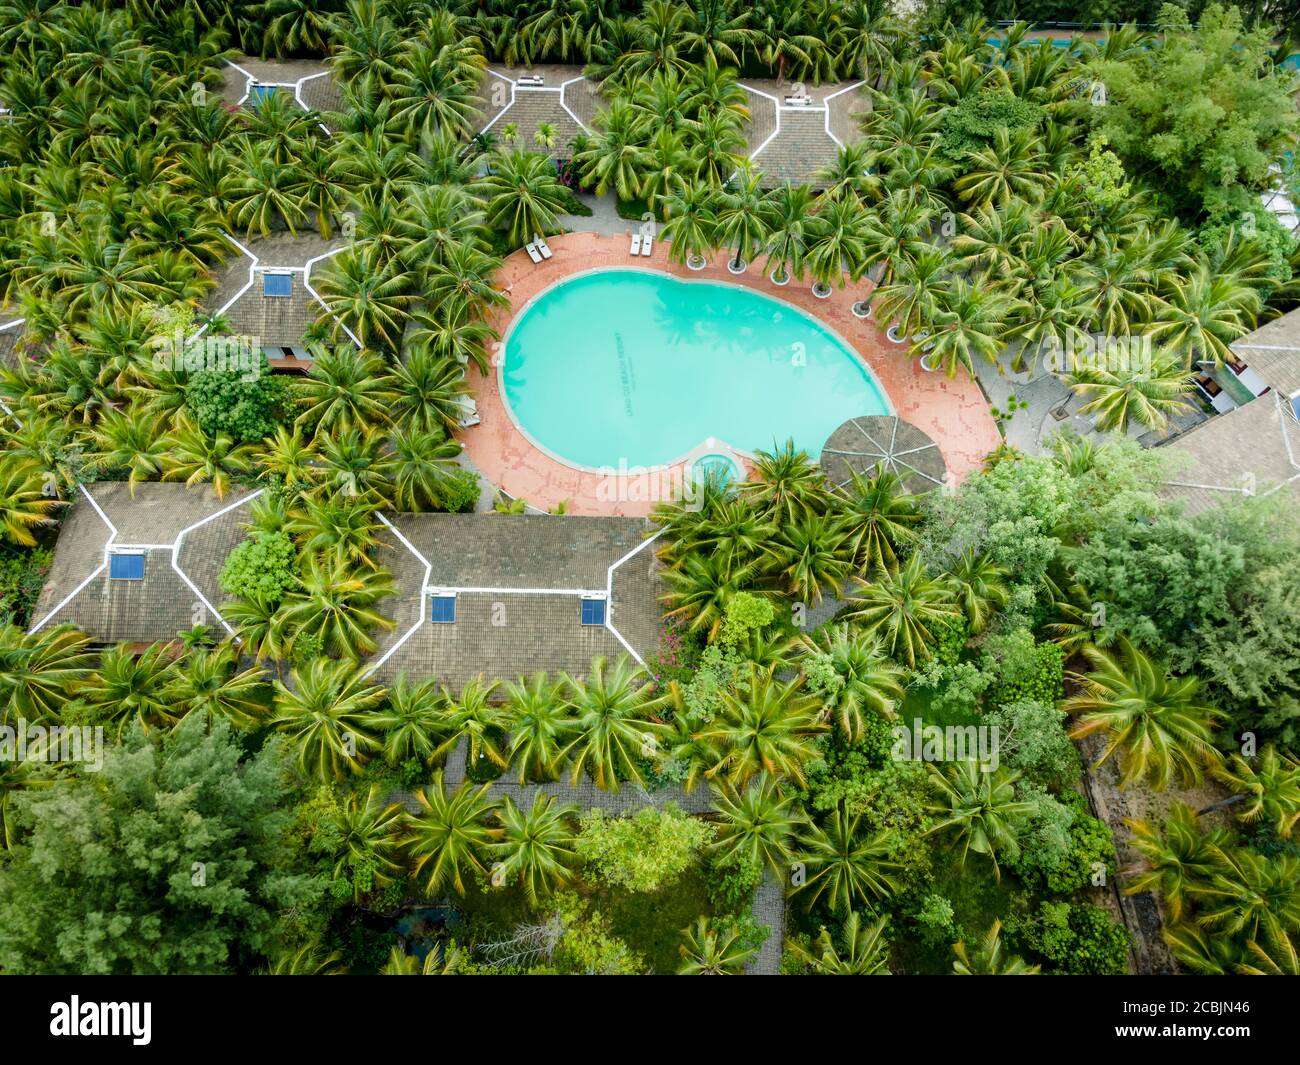 Lang Co Resort, Thua Thien Hue Province, Vietnam - August 3, 2020: Image of Lang Co Tourist Area in Khanh Hoa Province, Vietnam viewed from above. Thi Stock Photo